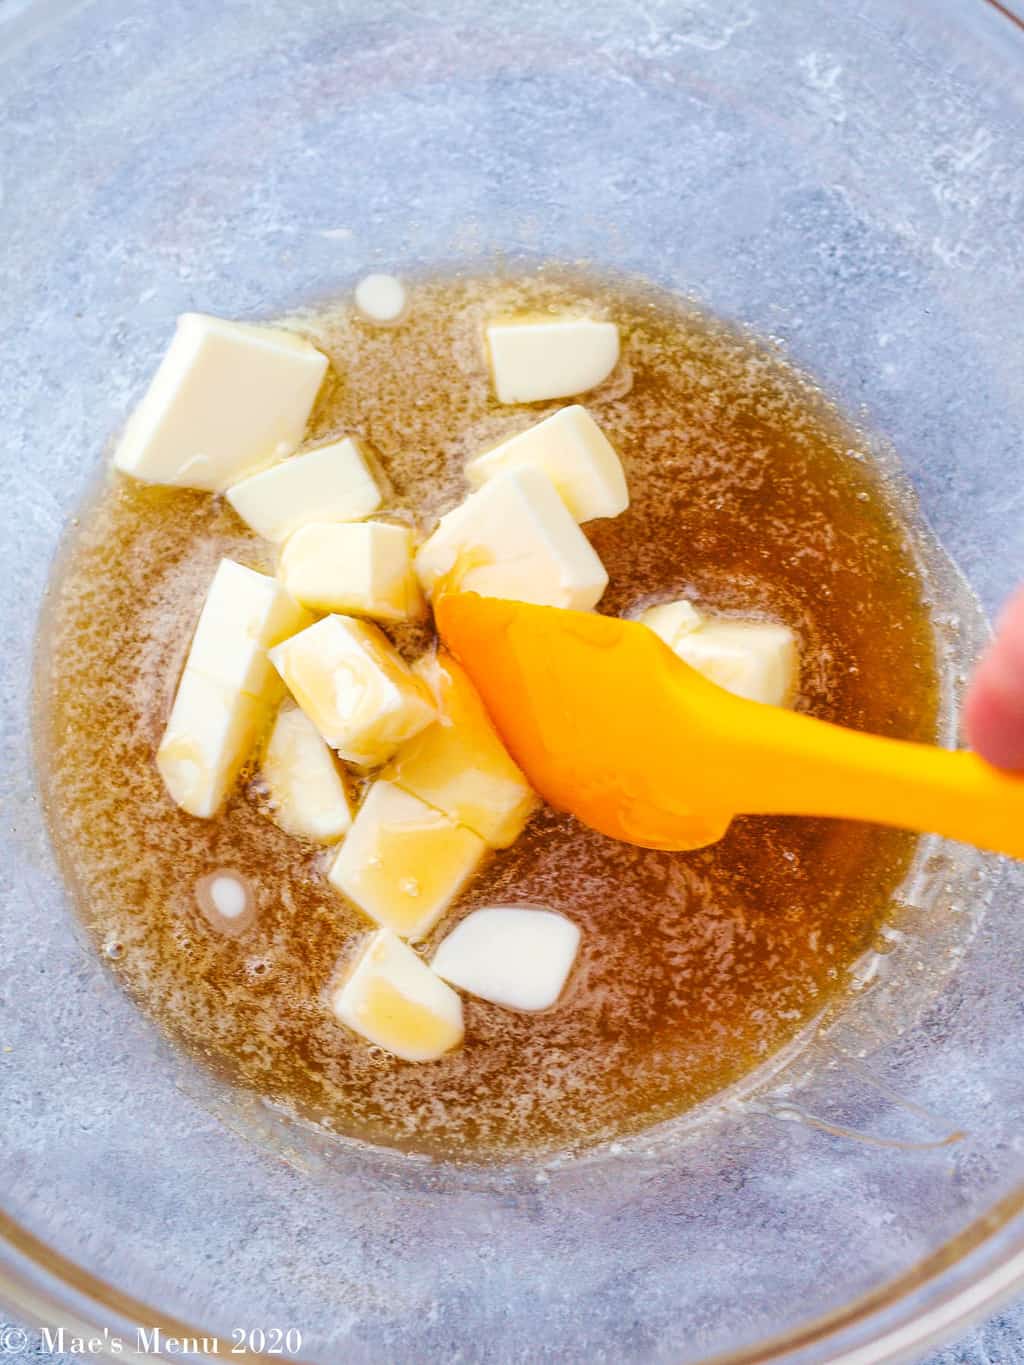 Mixing the butter and honey in the mixing bowl